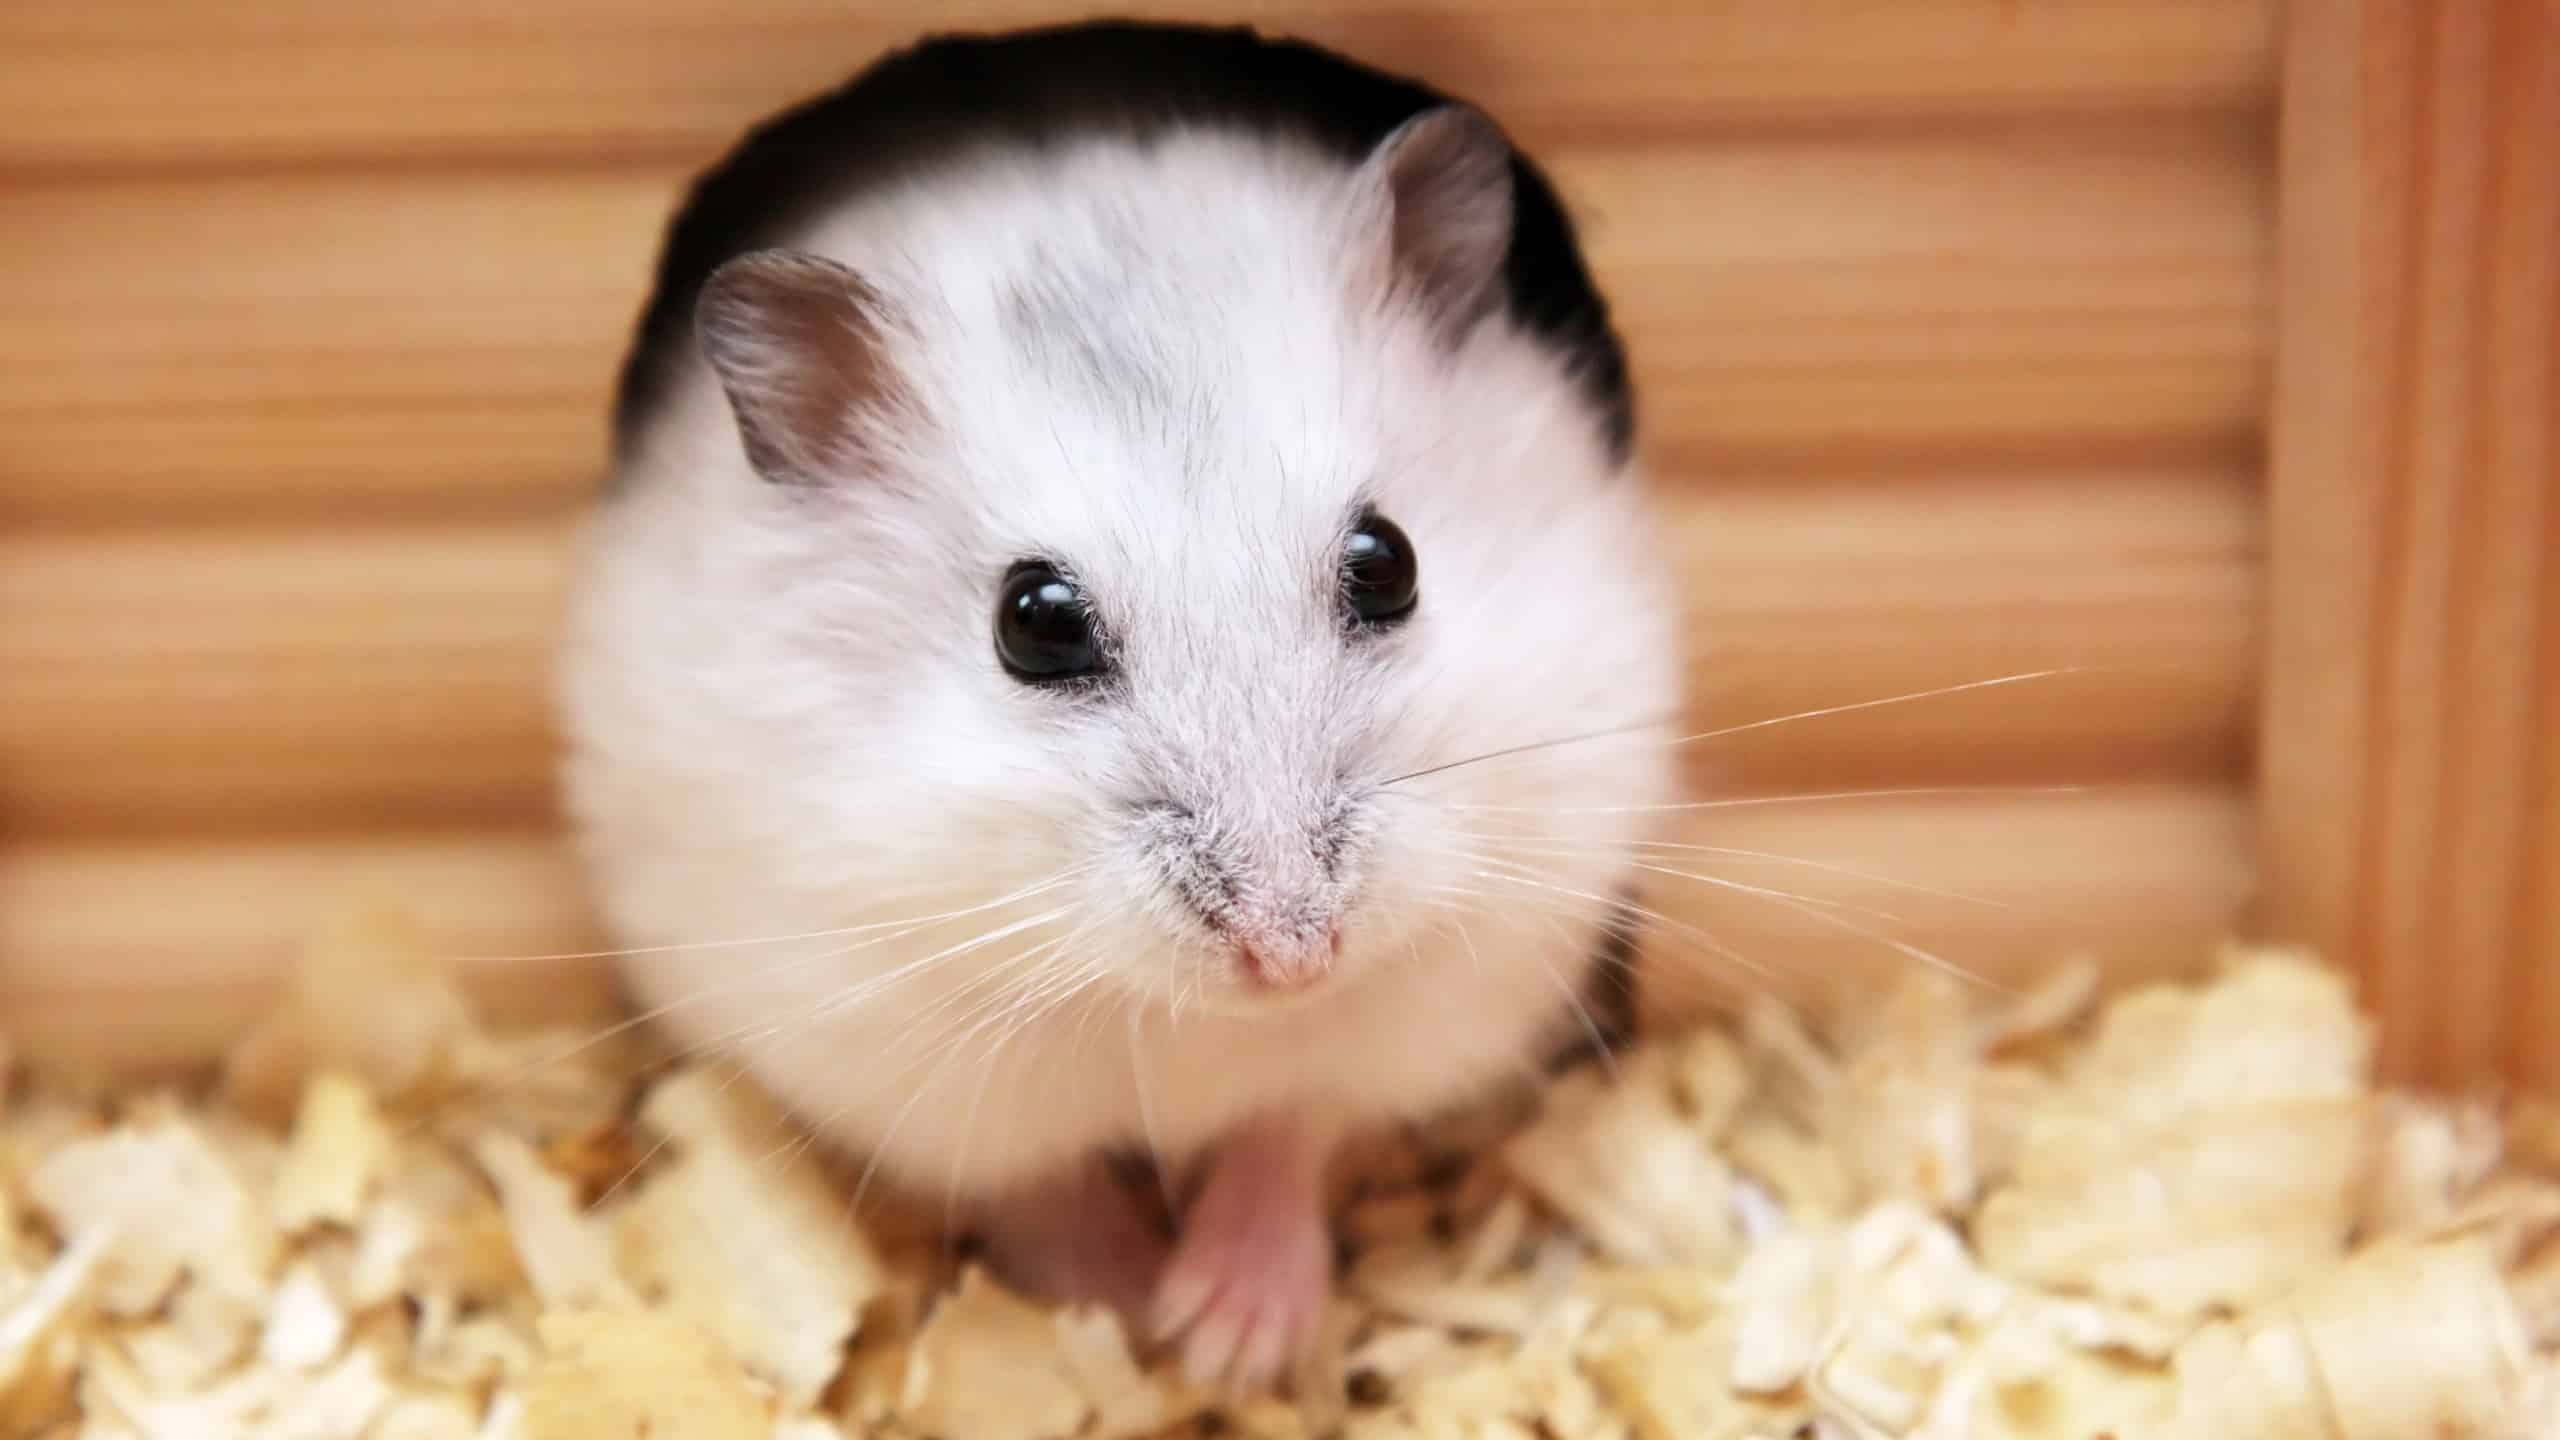 White and Brown Hamster on Brown Wooden Table. Wallpaper in 2560x1440 Resolution